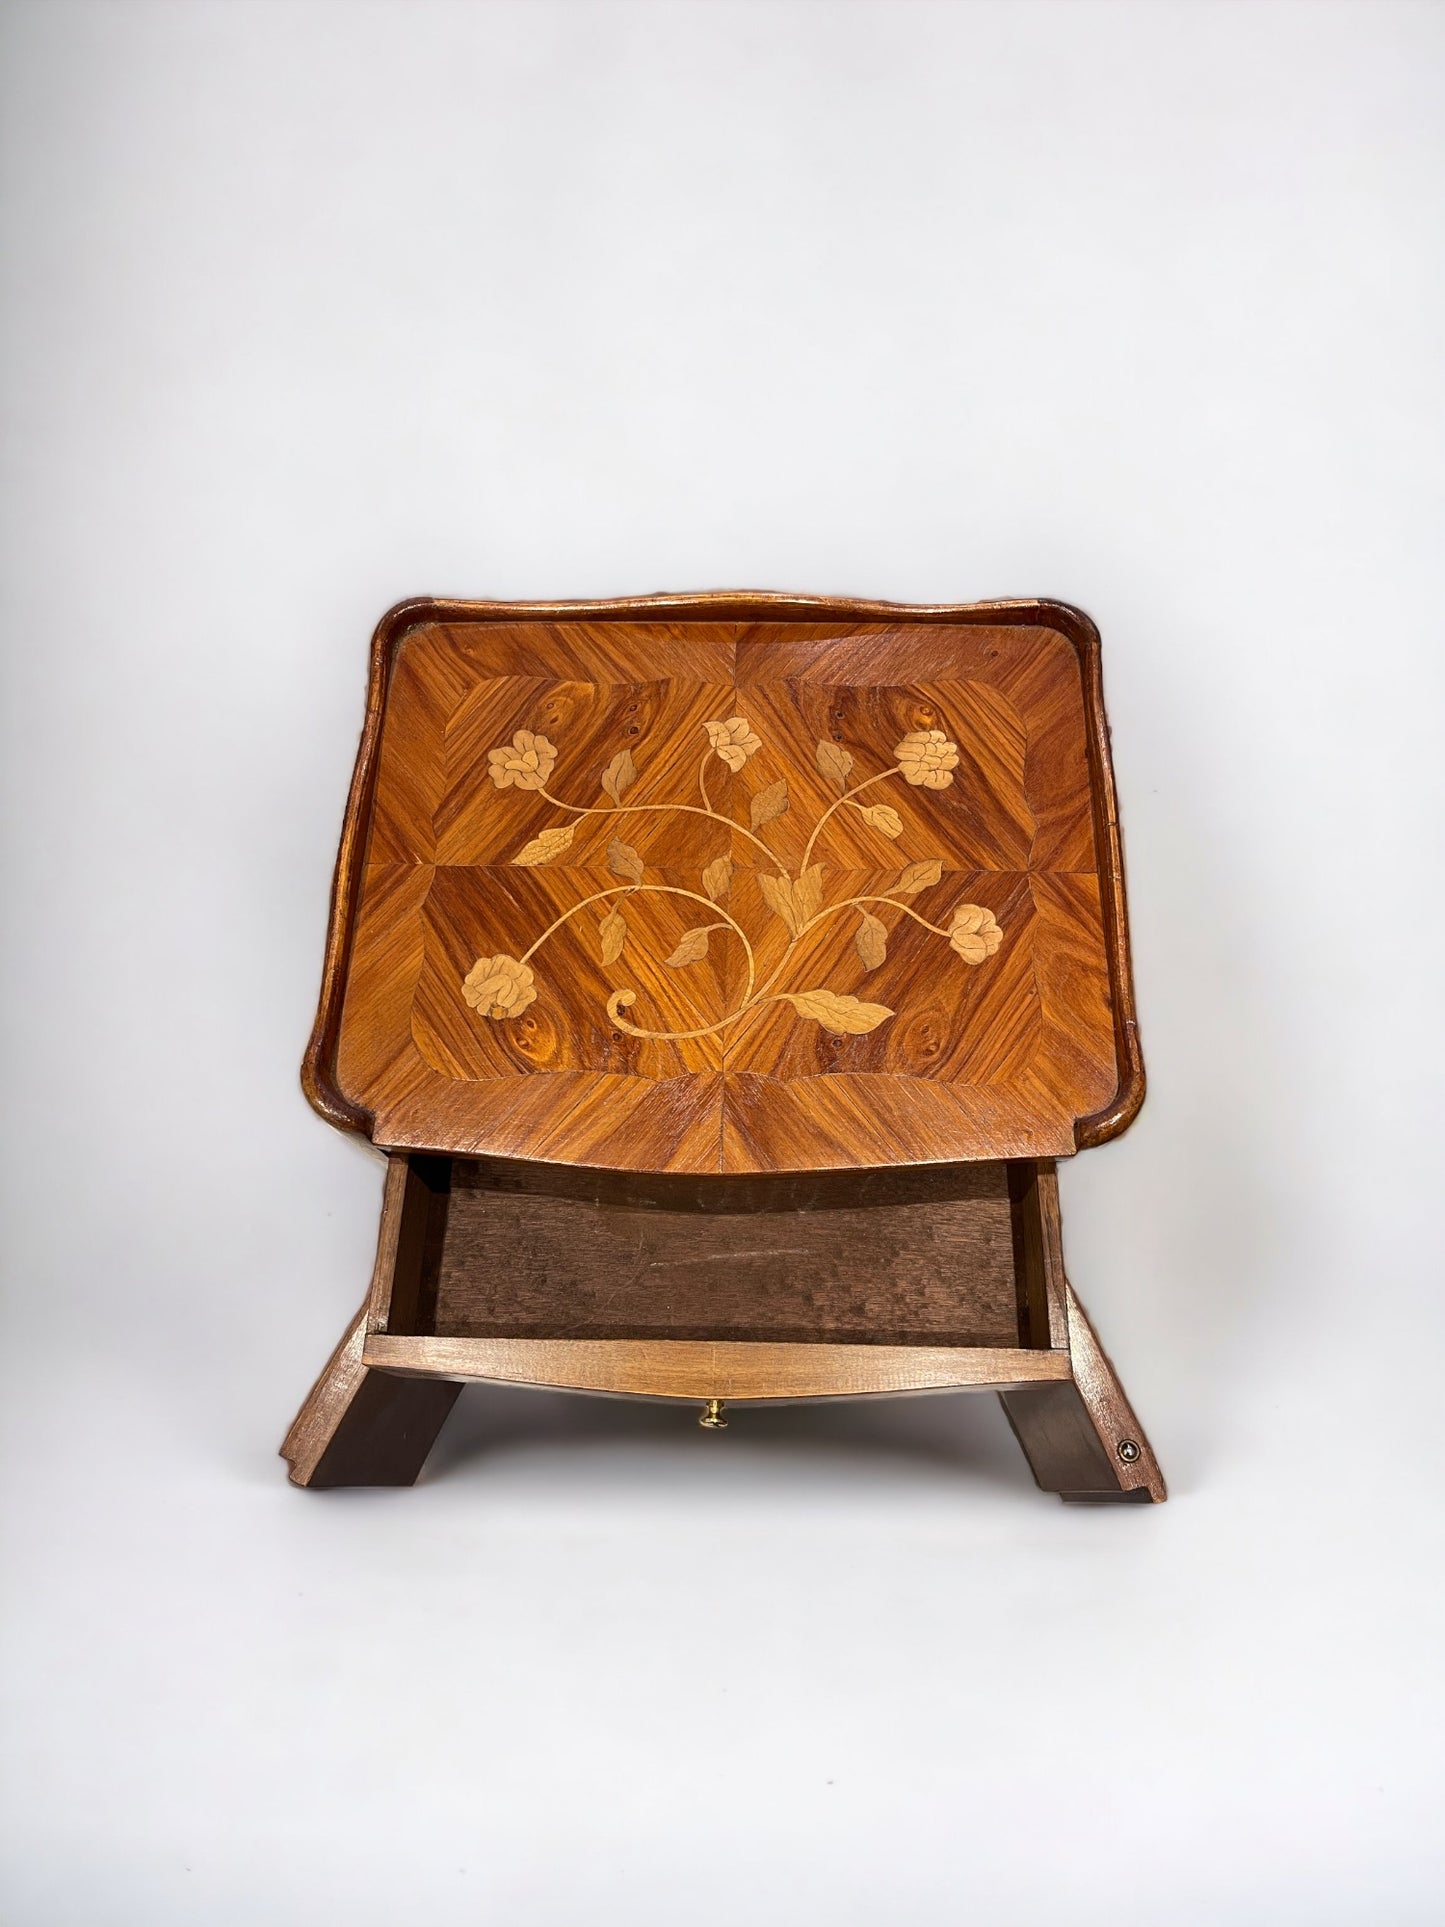 Pair of Marquetry Cabinets, c. 1930s